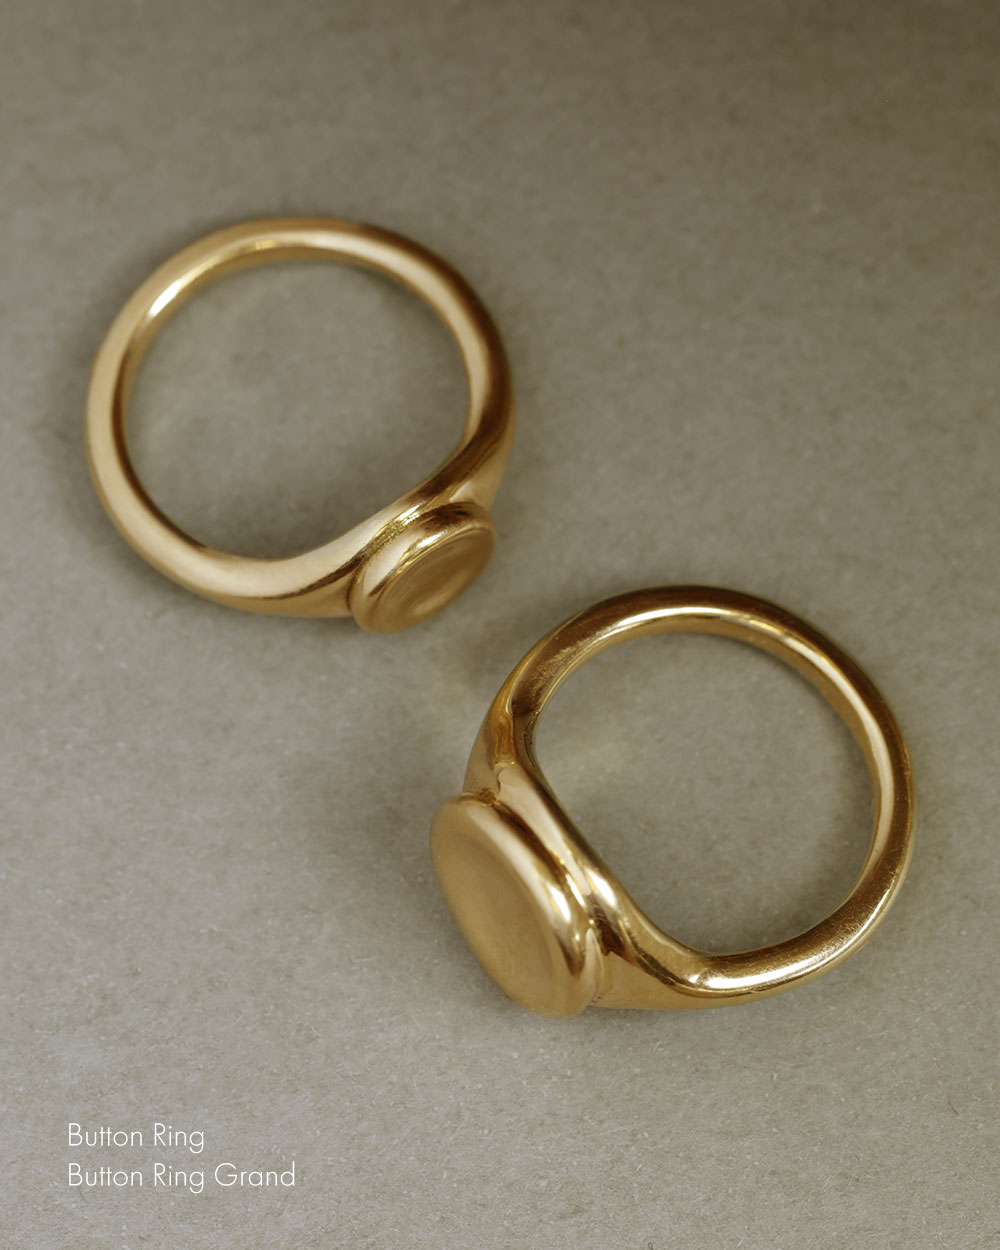 Top down view of two 18k gold button rings - one large and one small. Both 18k yellow solid gold signet style rings with a large soft concave button circle atop the signet.